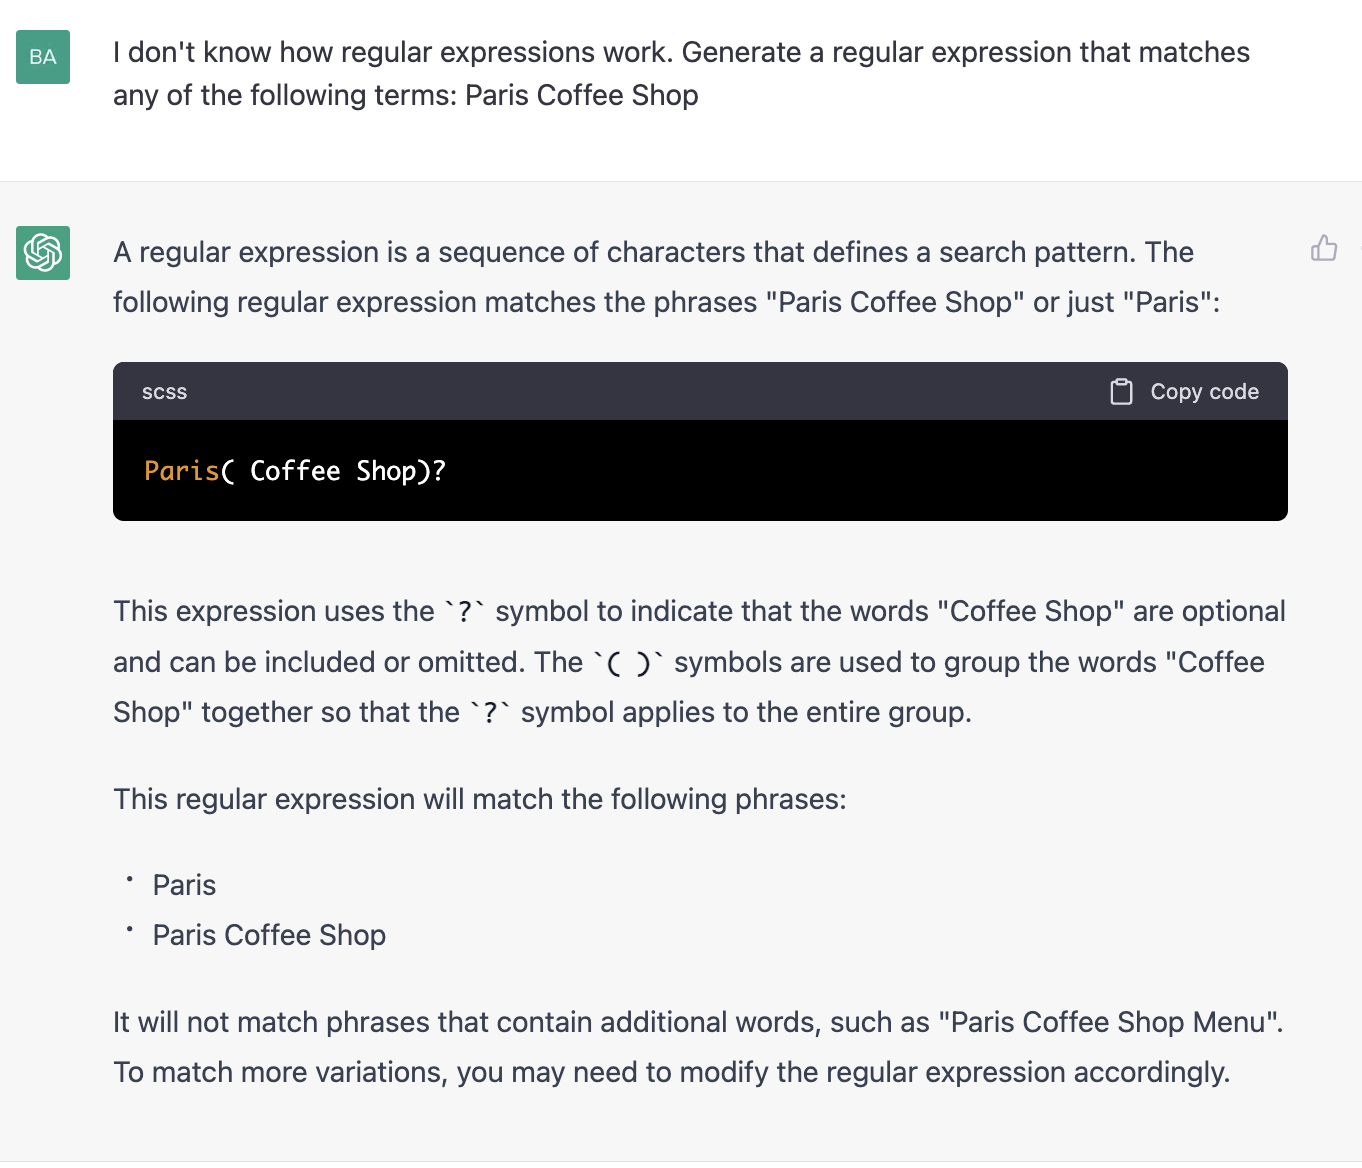 ChatGPT prompt about generating a regular expression that matches Paris Coffee shop